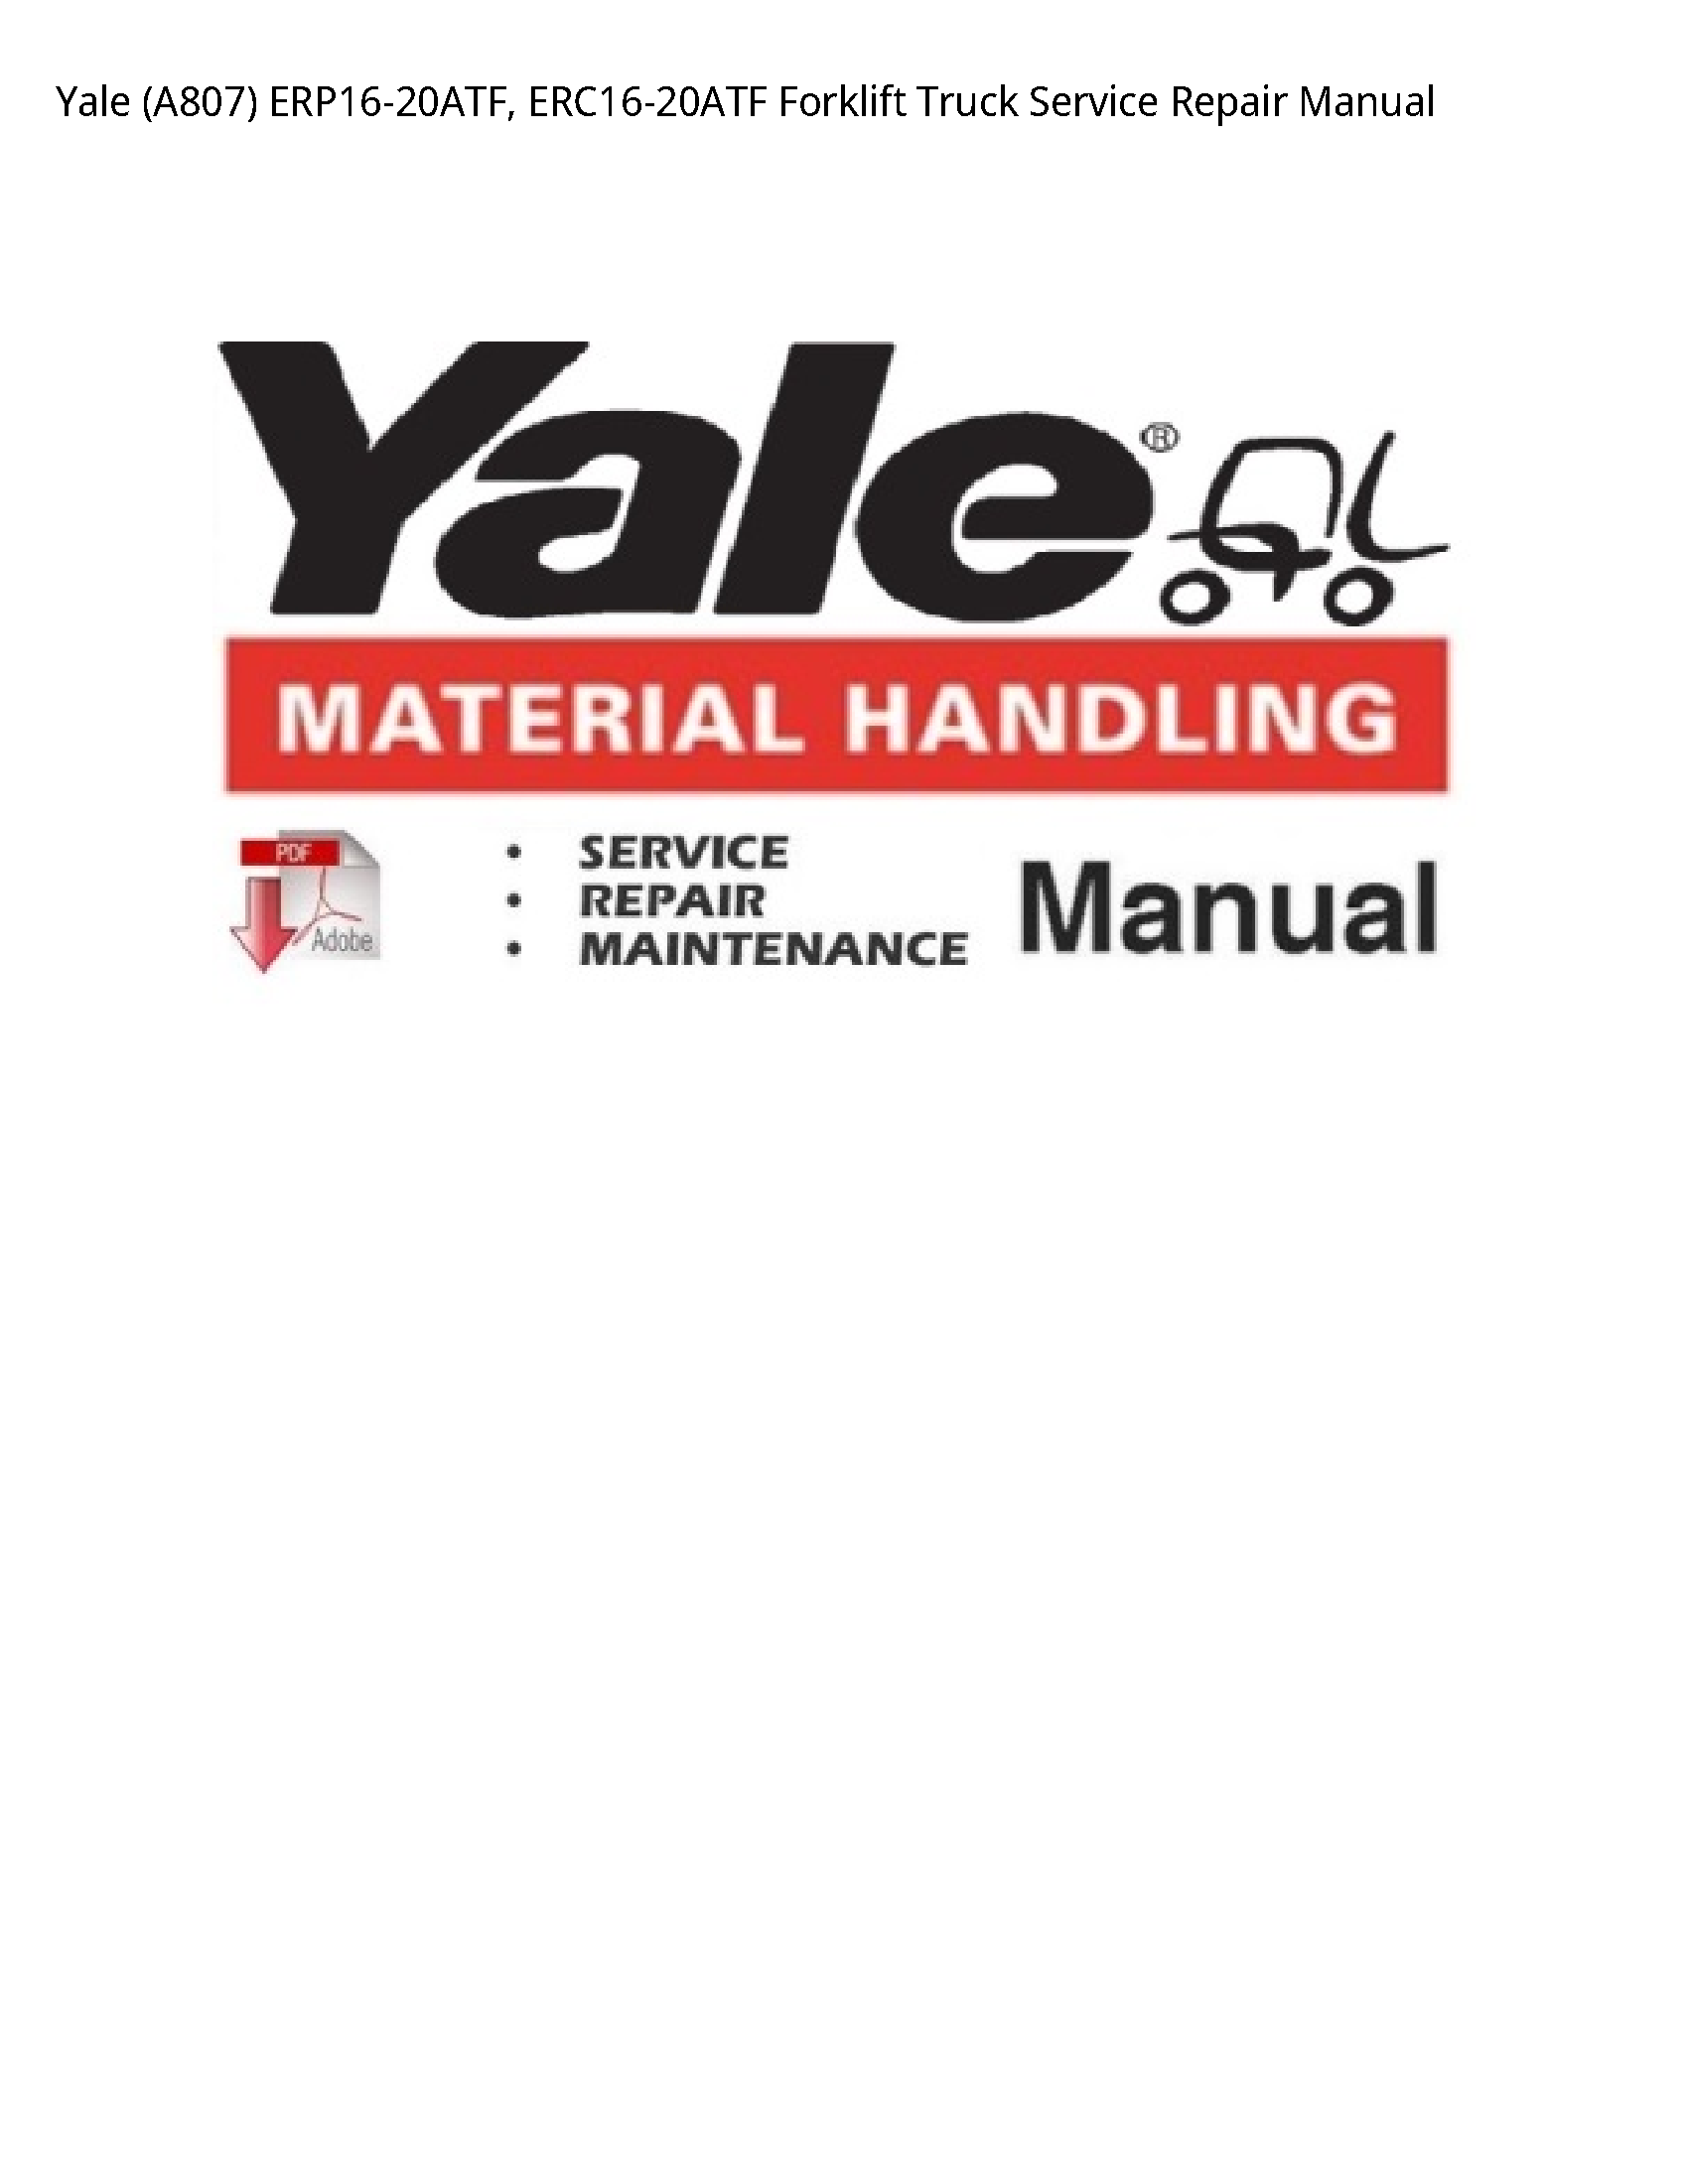 Yale (A807) Forklift Truck manual